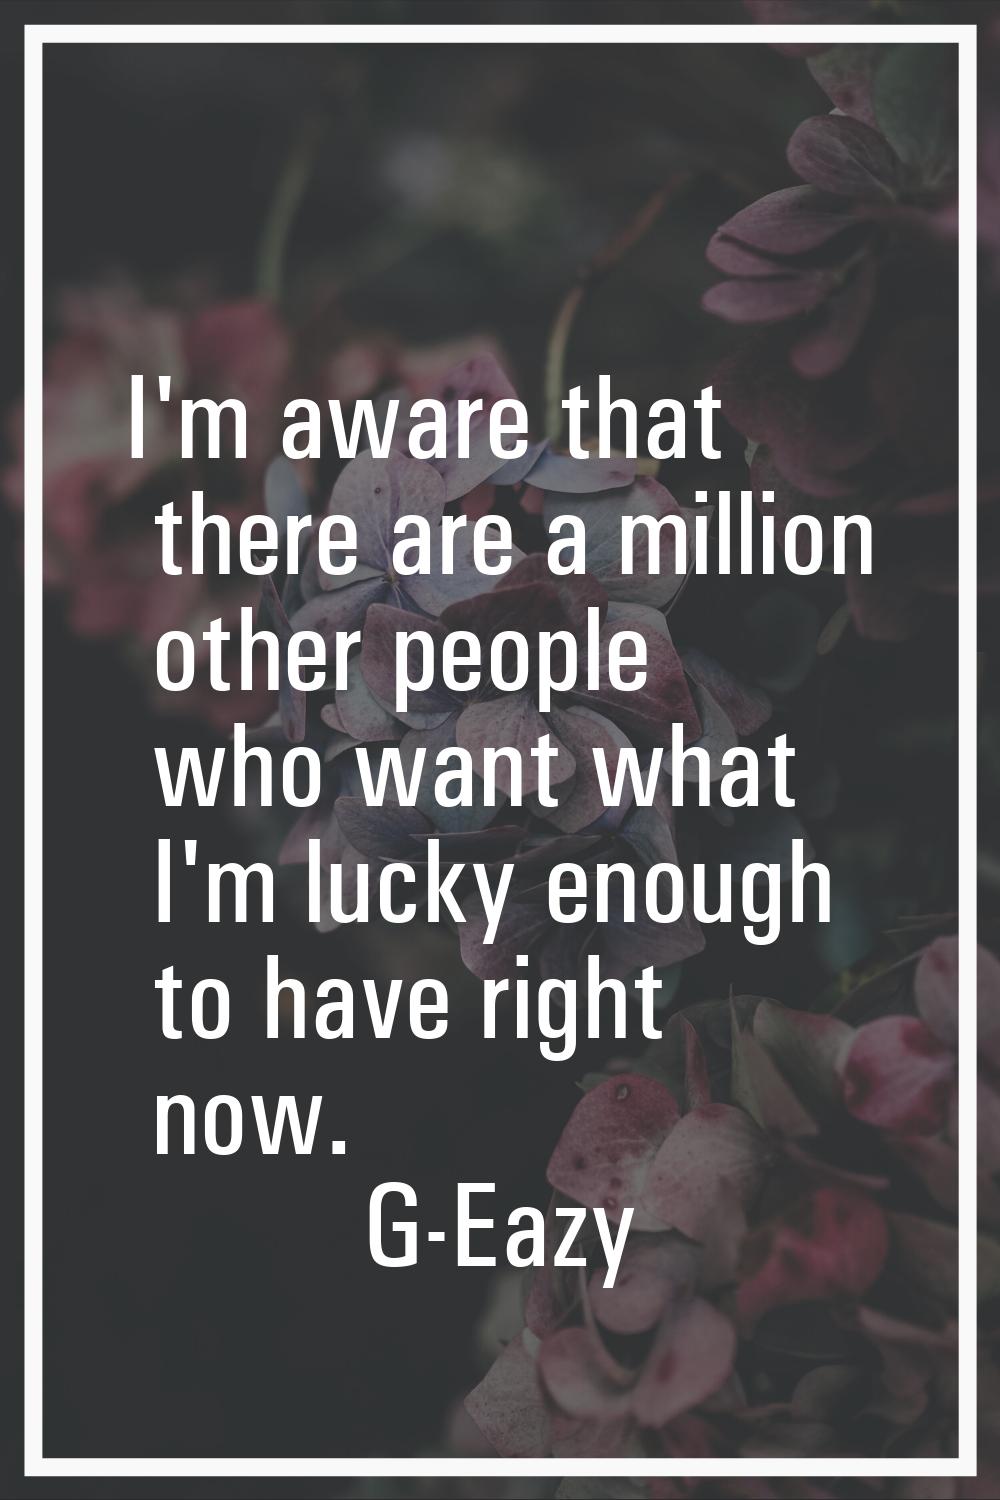 I'm aware that there are a million other people who want what I'm lucky enough to have right now.